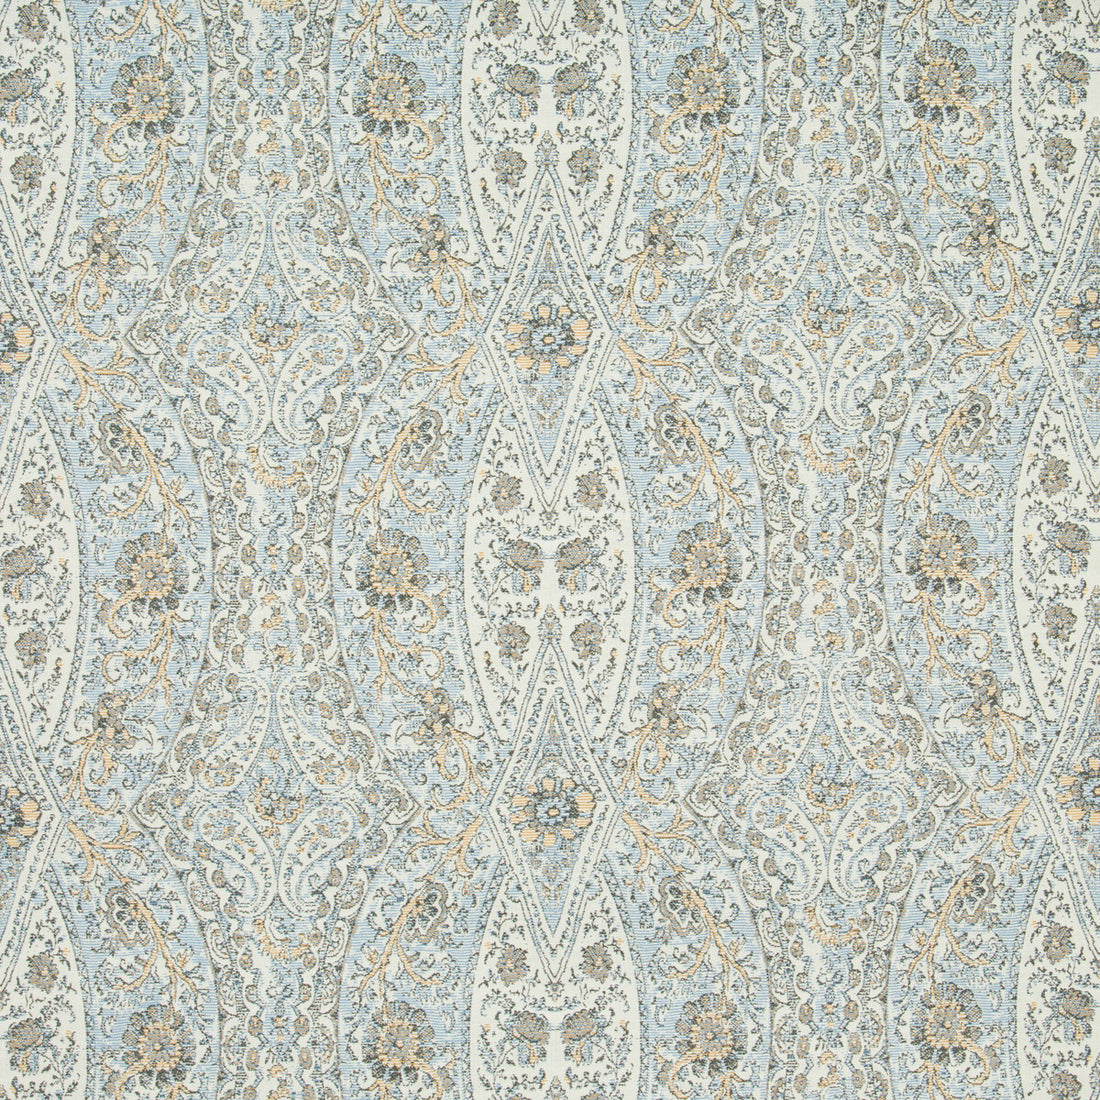 Kravet Design fabric in 34726-54 color - pattern 34726.54.0 - by Kravet Design in the Crypton Home collection